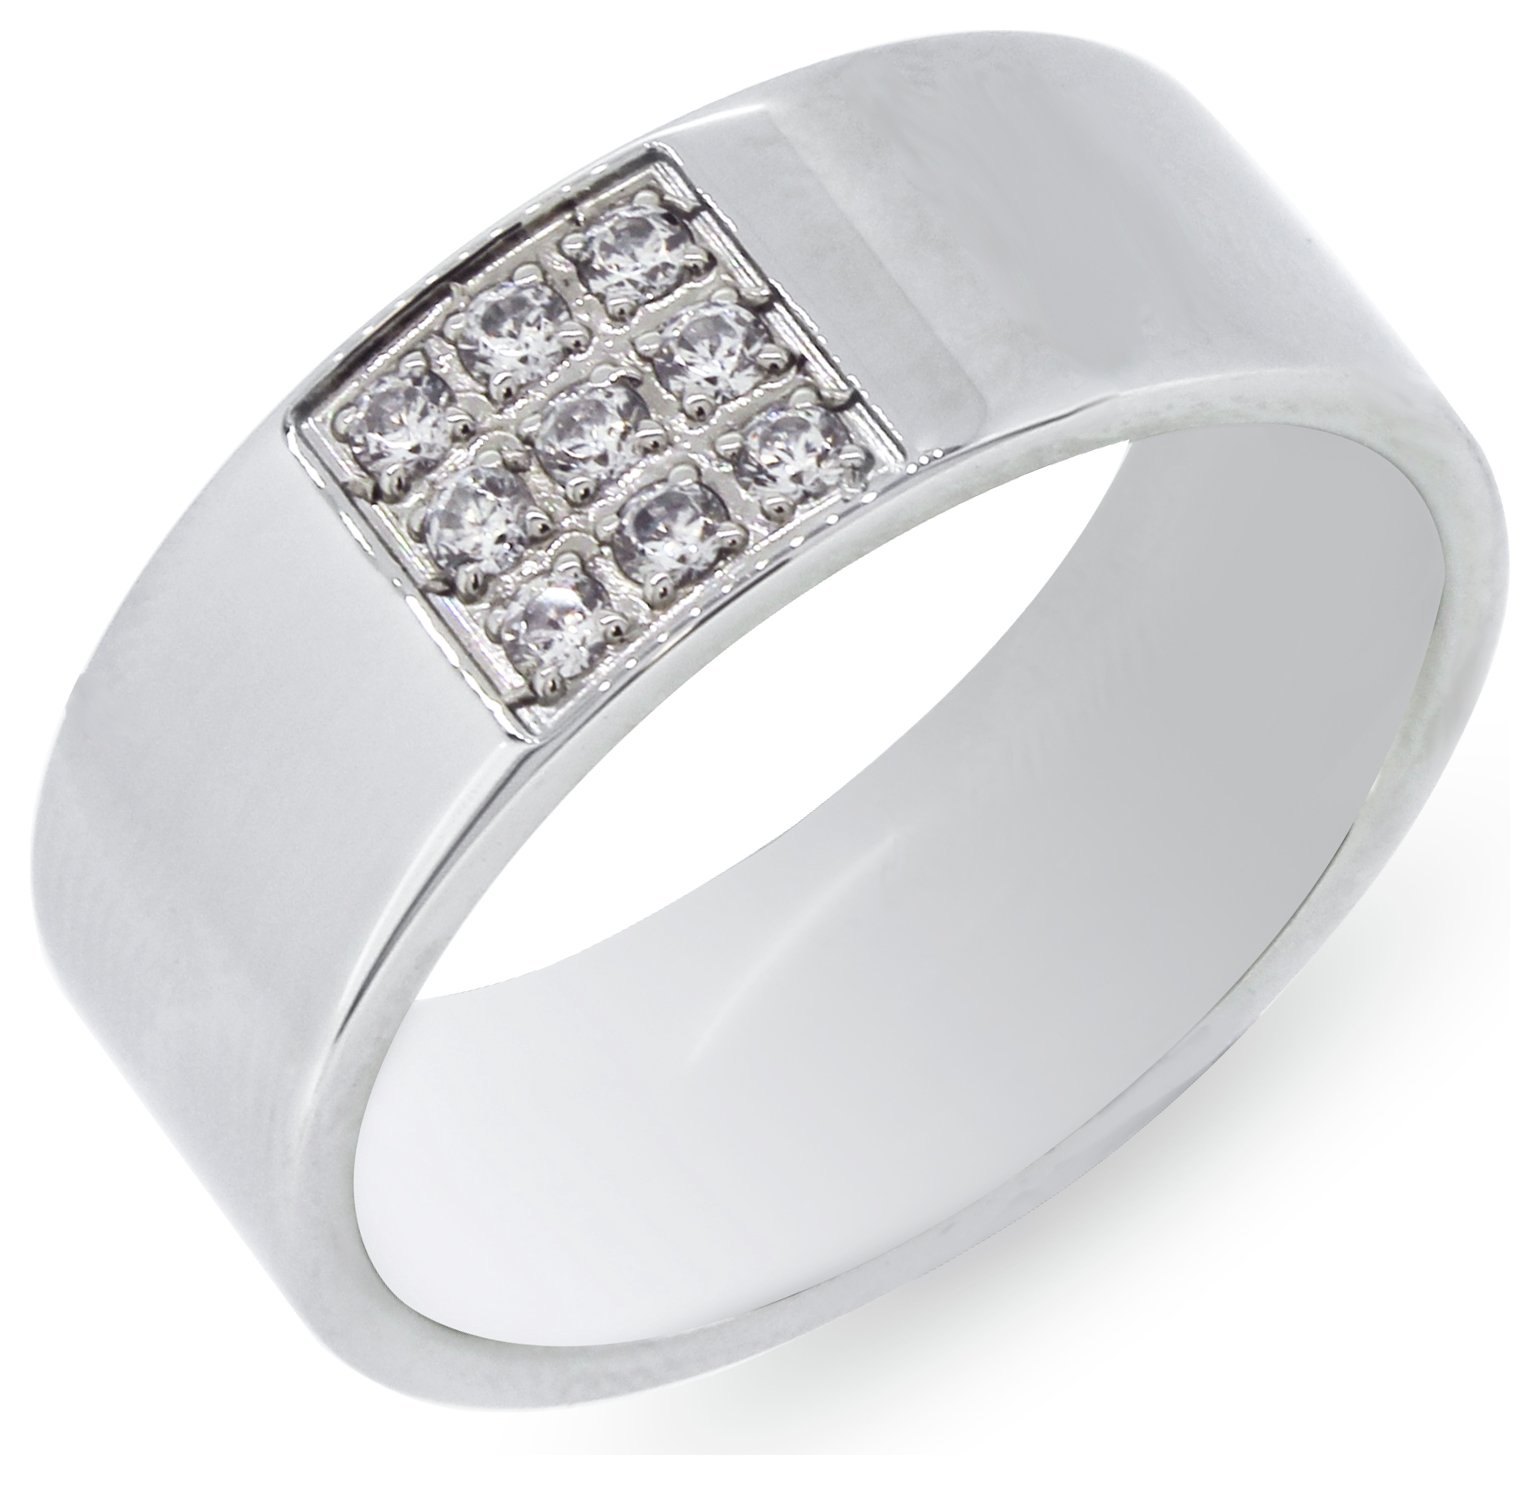 Domain Gents' Stainless Steel Cubic Zirconia Ring Boxed. Review